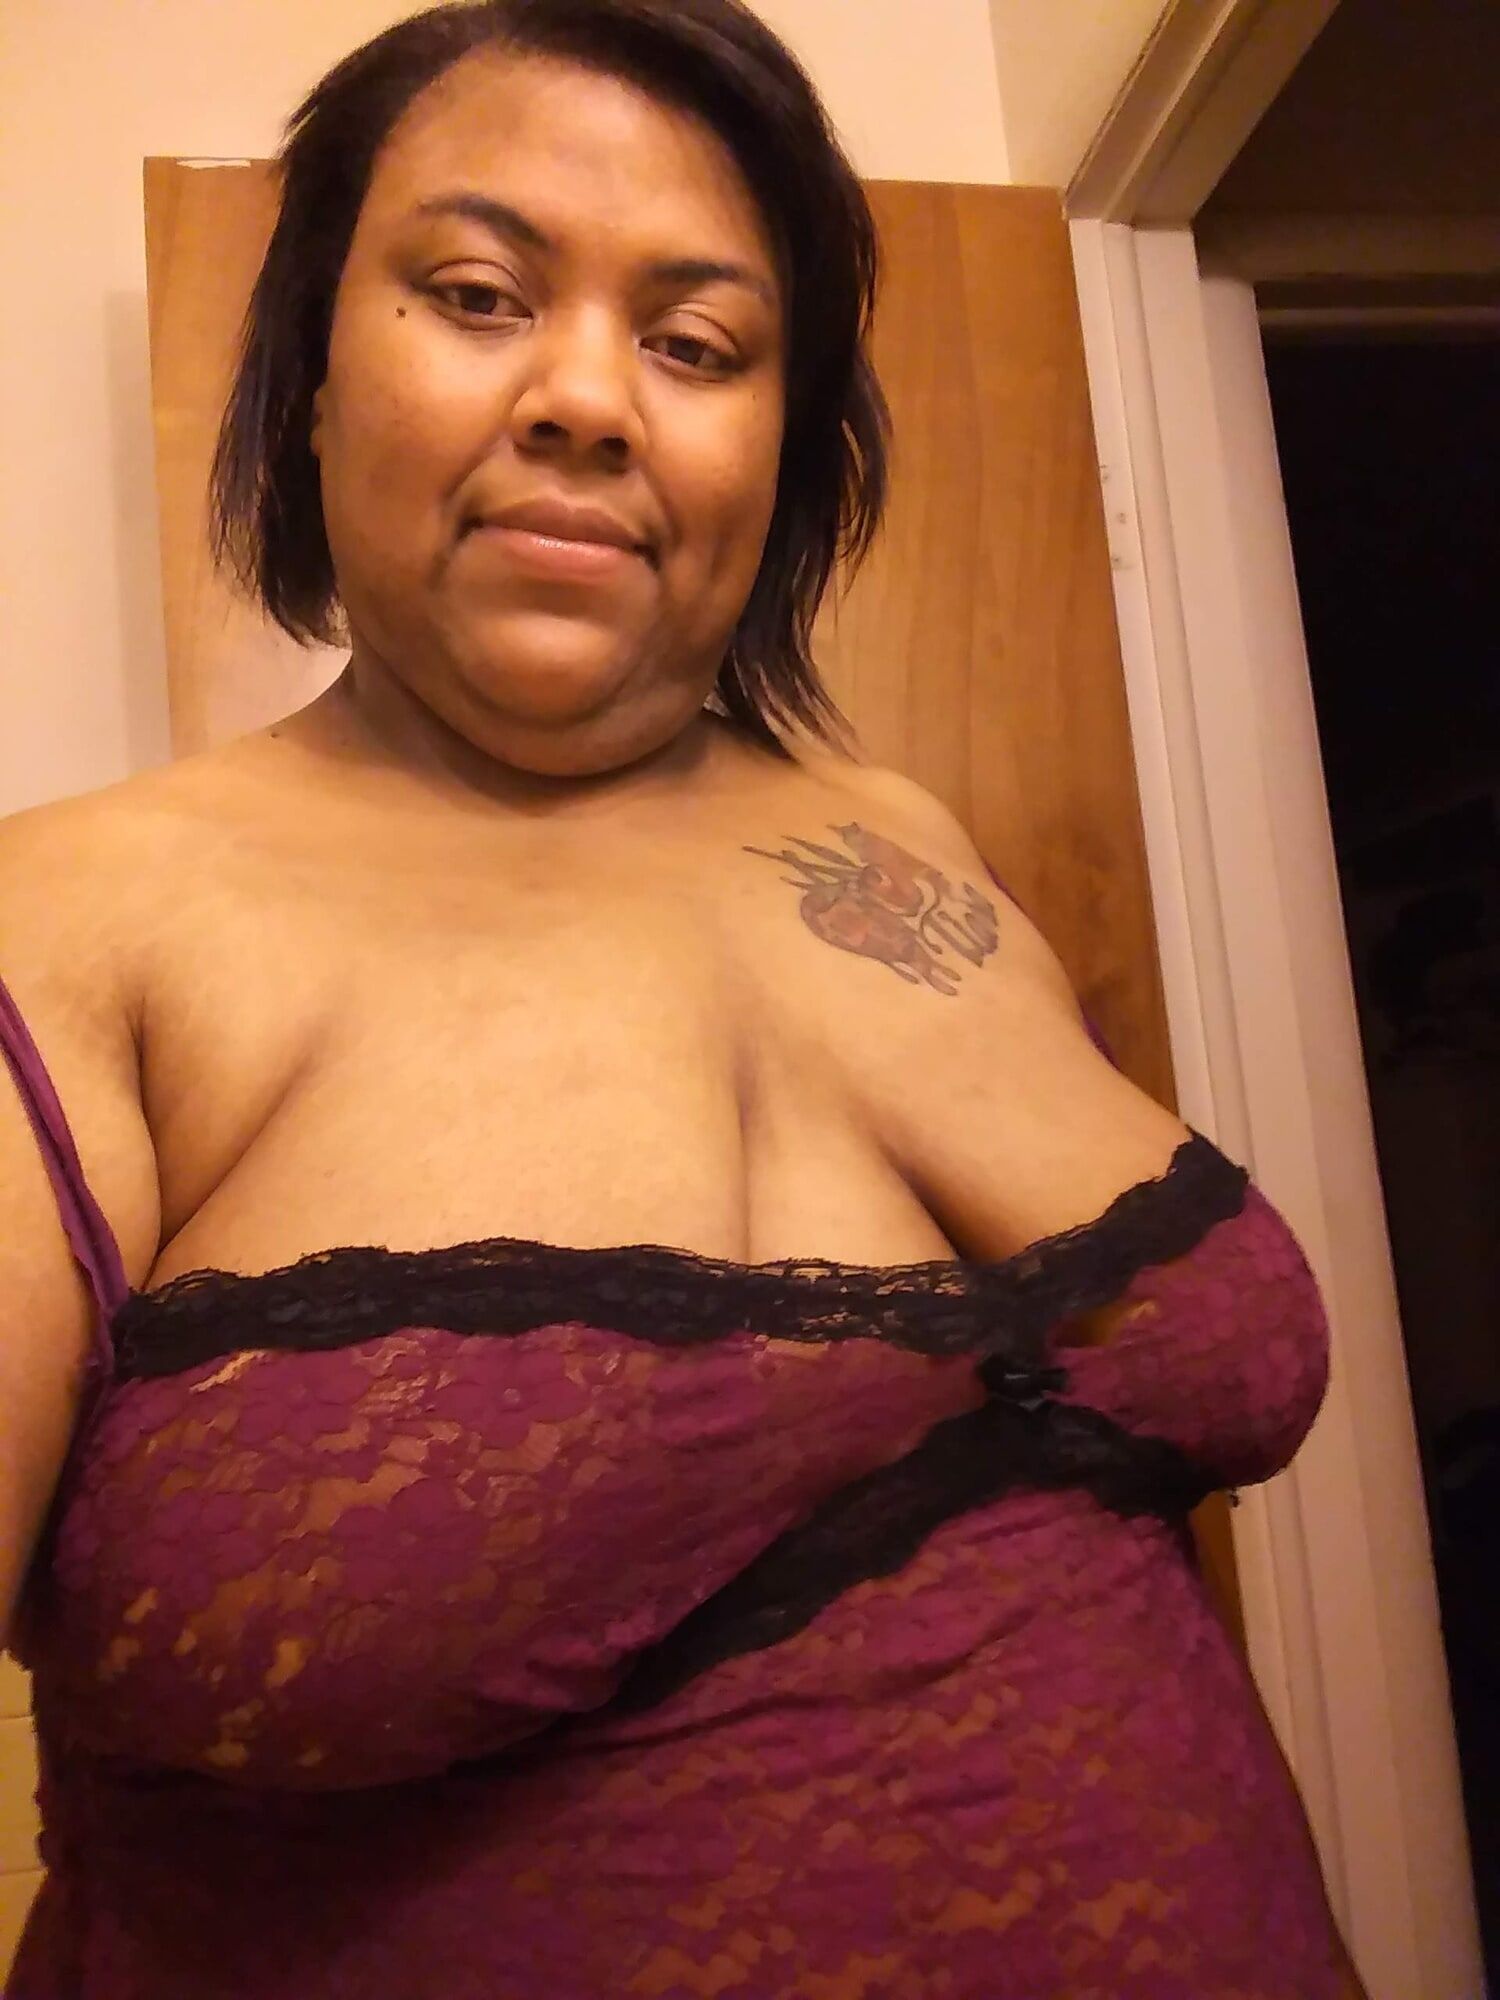 Fat Belly Tiara Danielle Cox Exposed #3